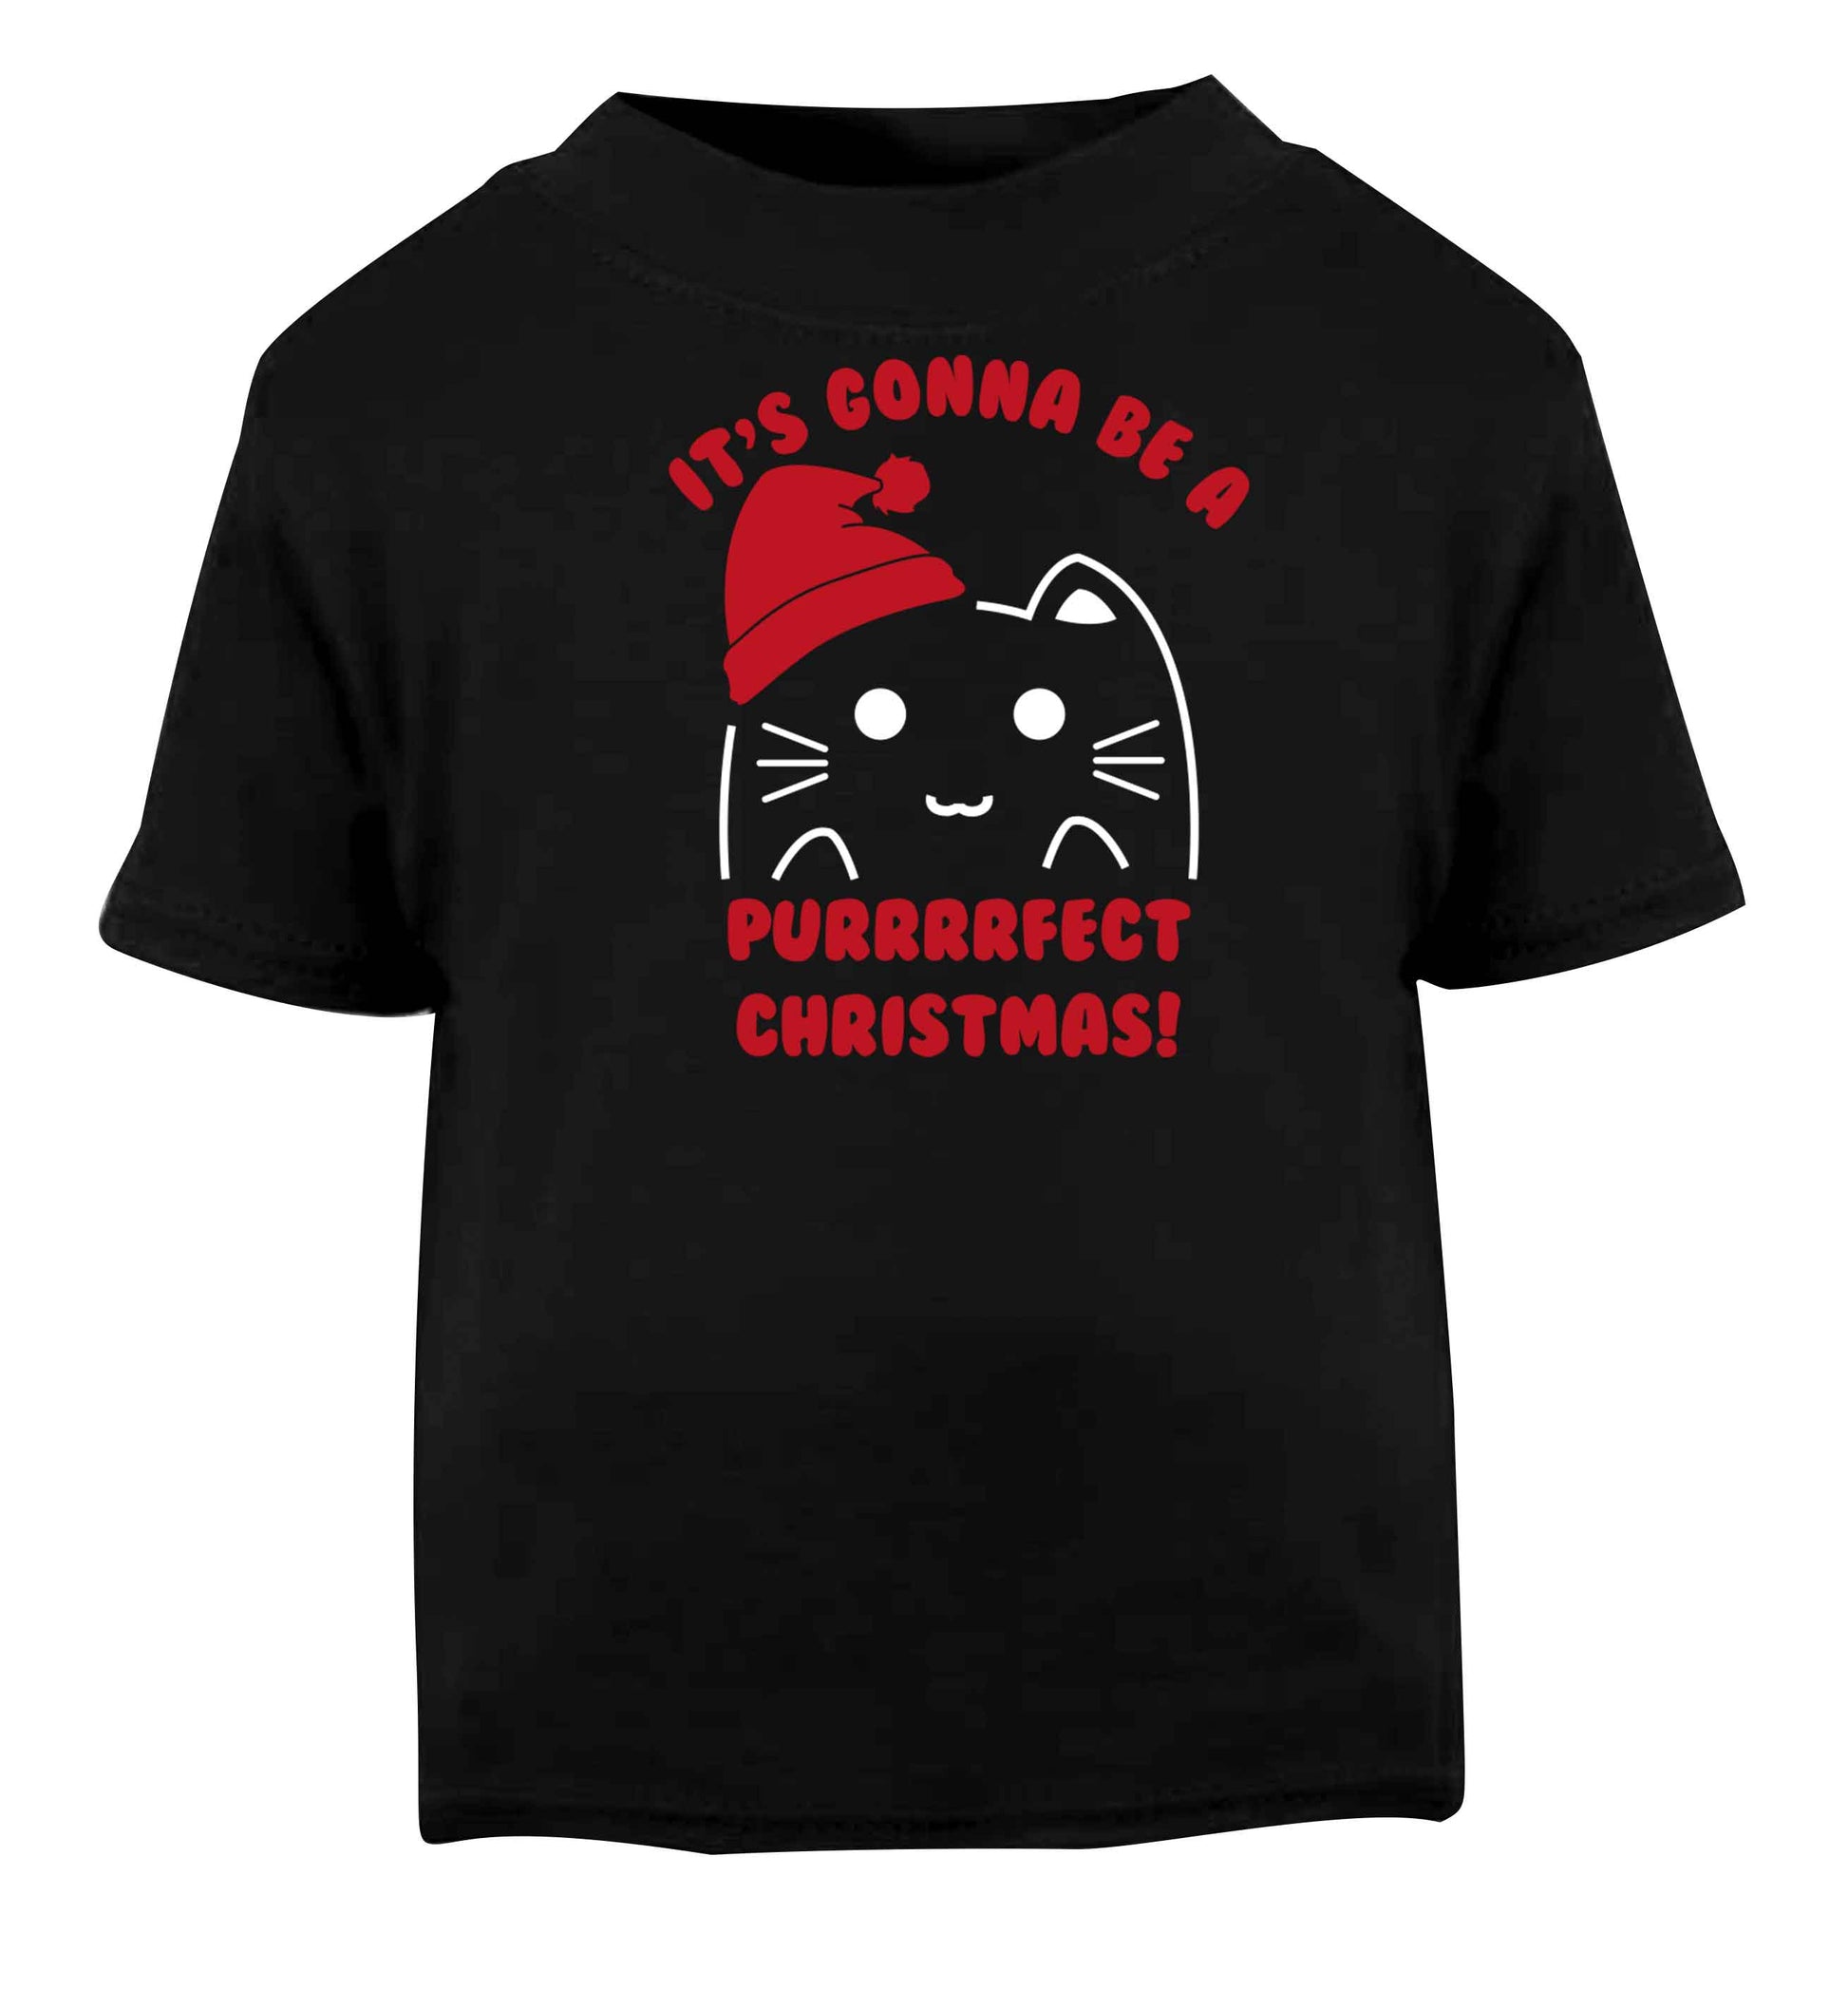 It's going to be a purrfect Christmas Black baby toddler Tshirt 2 years